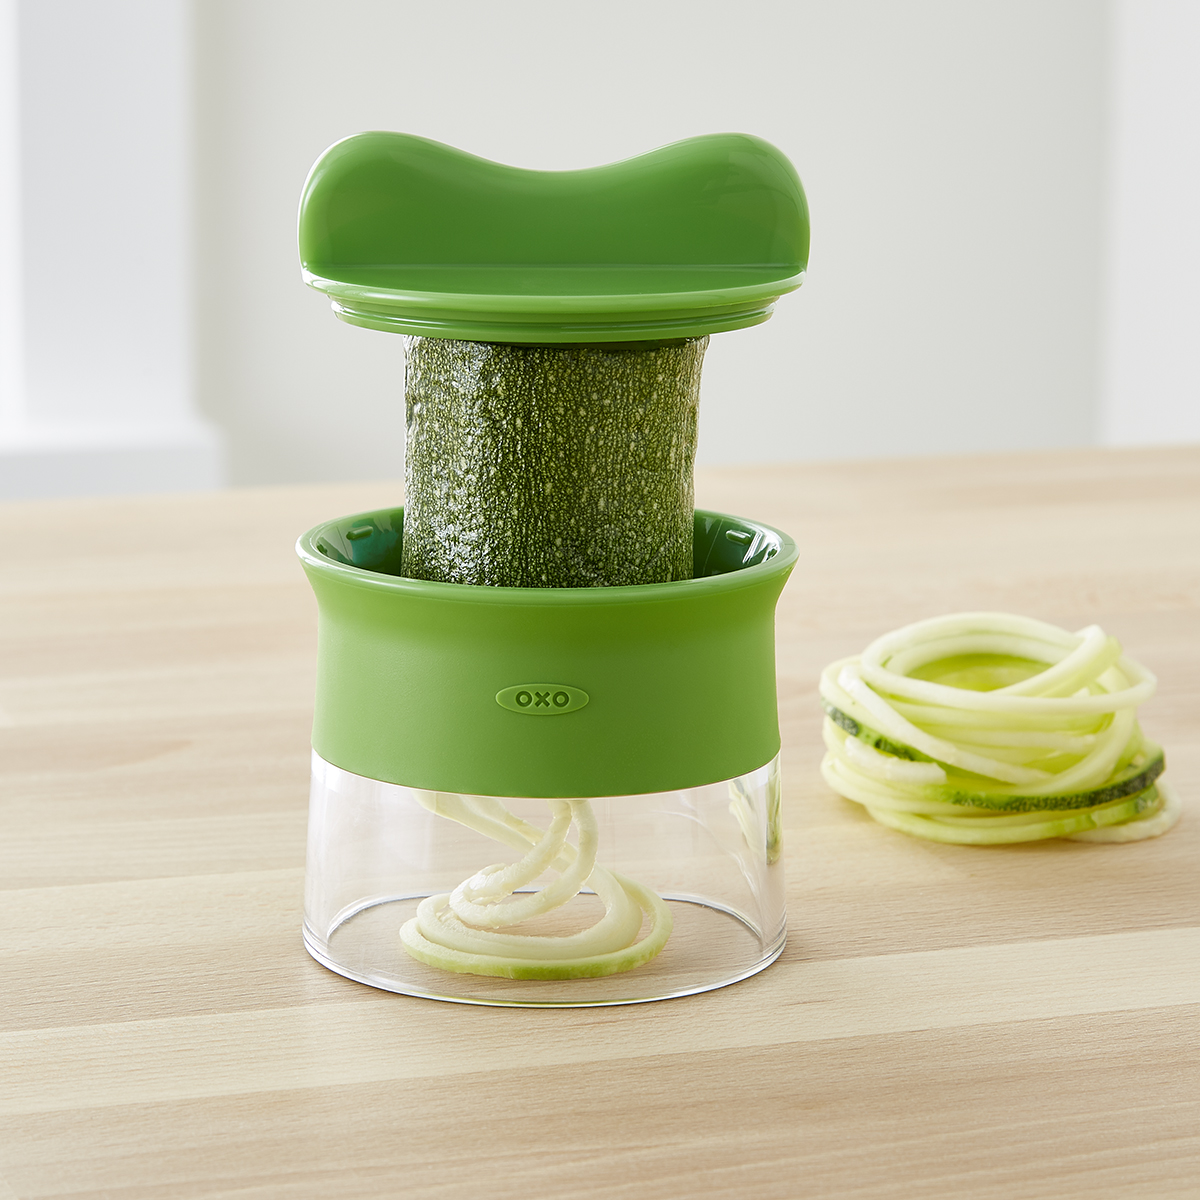 https://www.containerstore.com/catalogimages/330599/SS_17-10067159_OXO_Hand-Held_Spirali.jpg